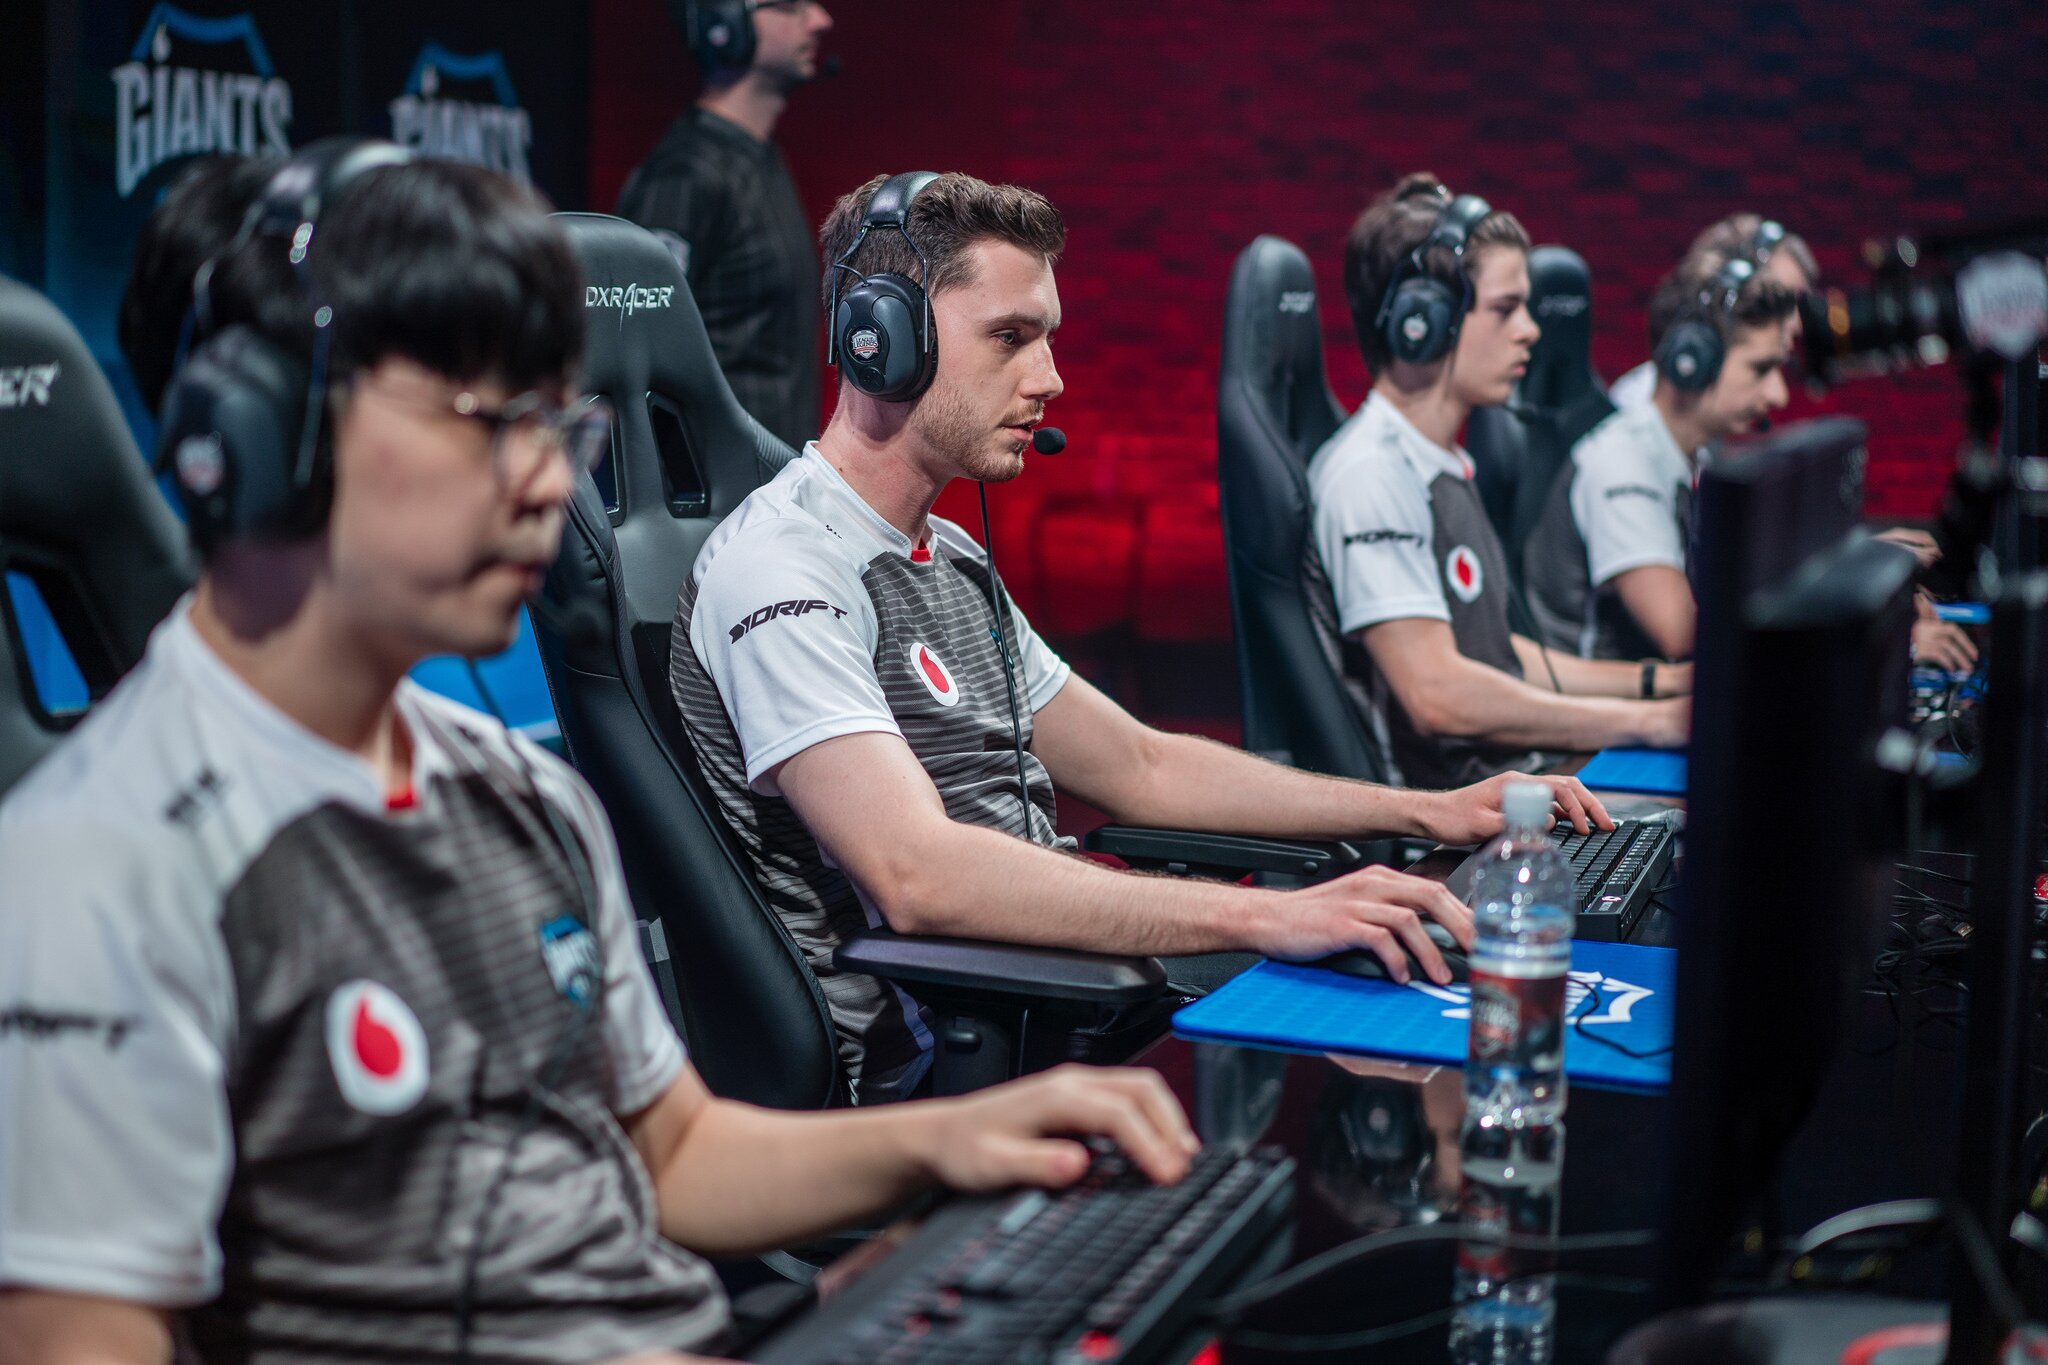 This news follows after multiple big-name organizations like Splyce, Roccat, Unicorns of Love, and H2K were reportedly denied spots as well.